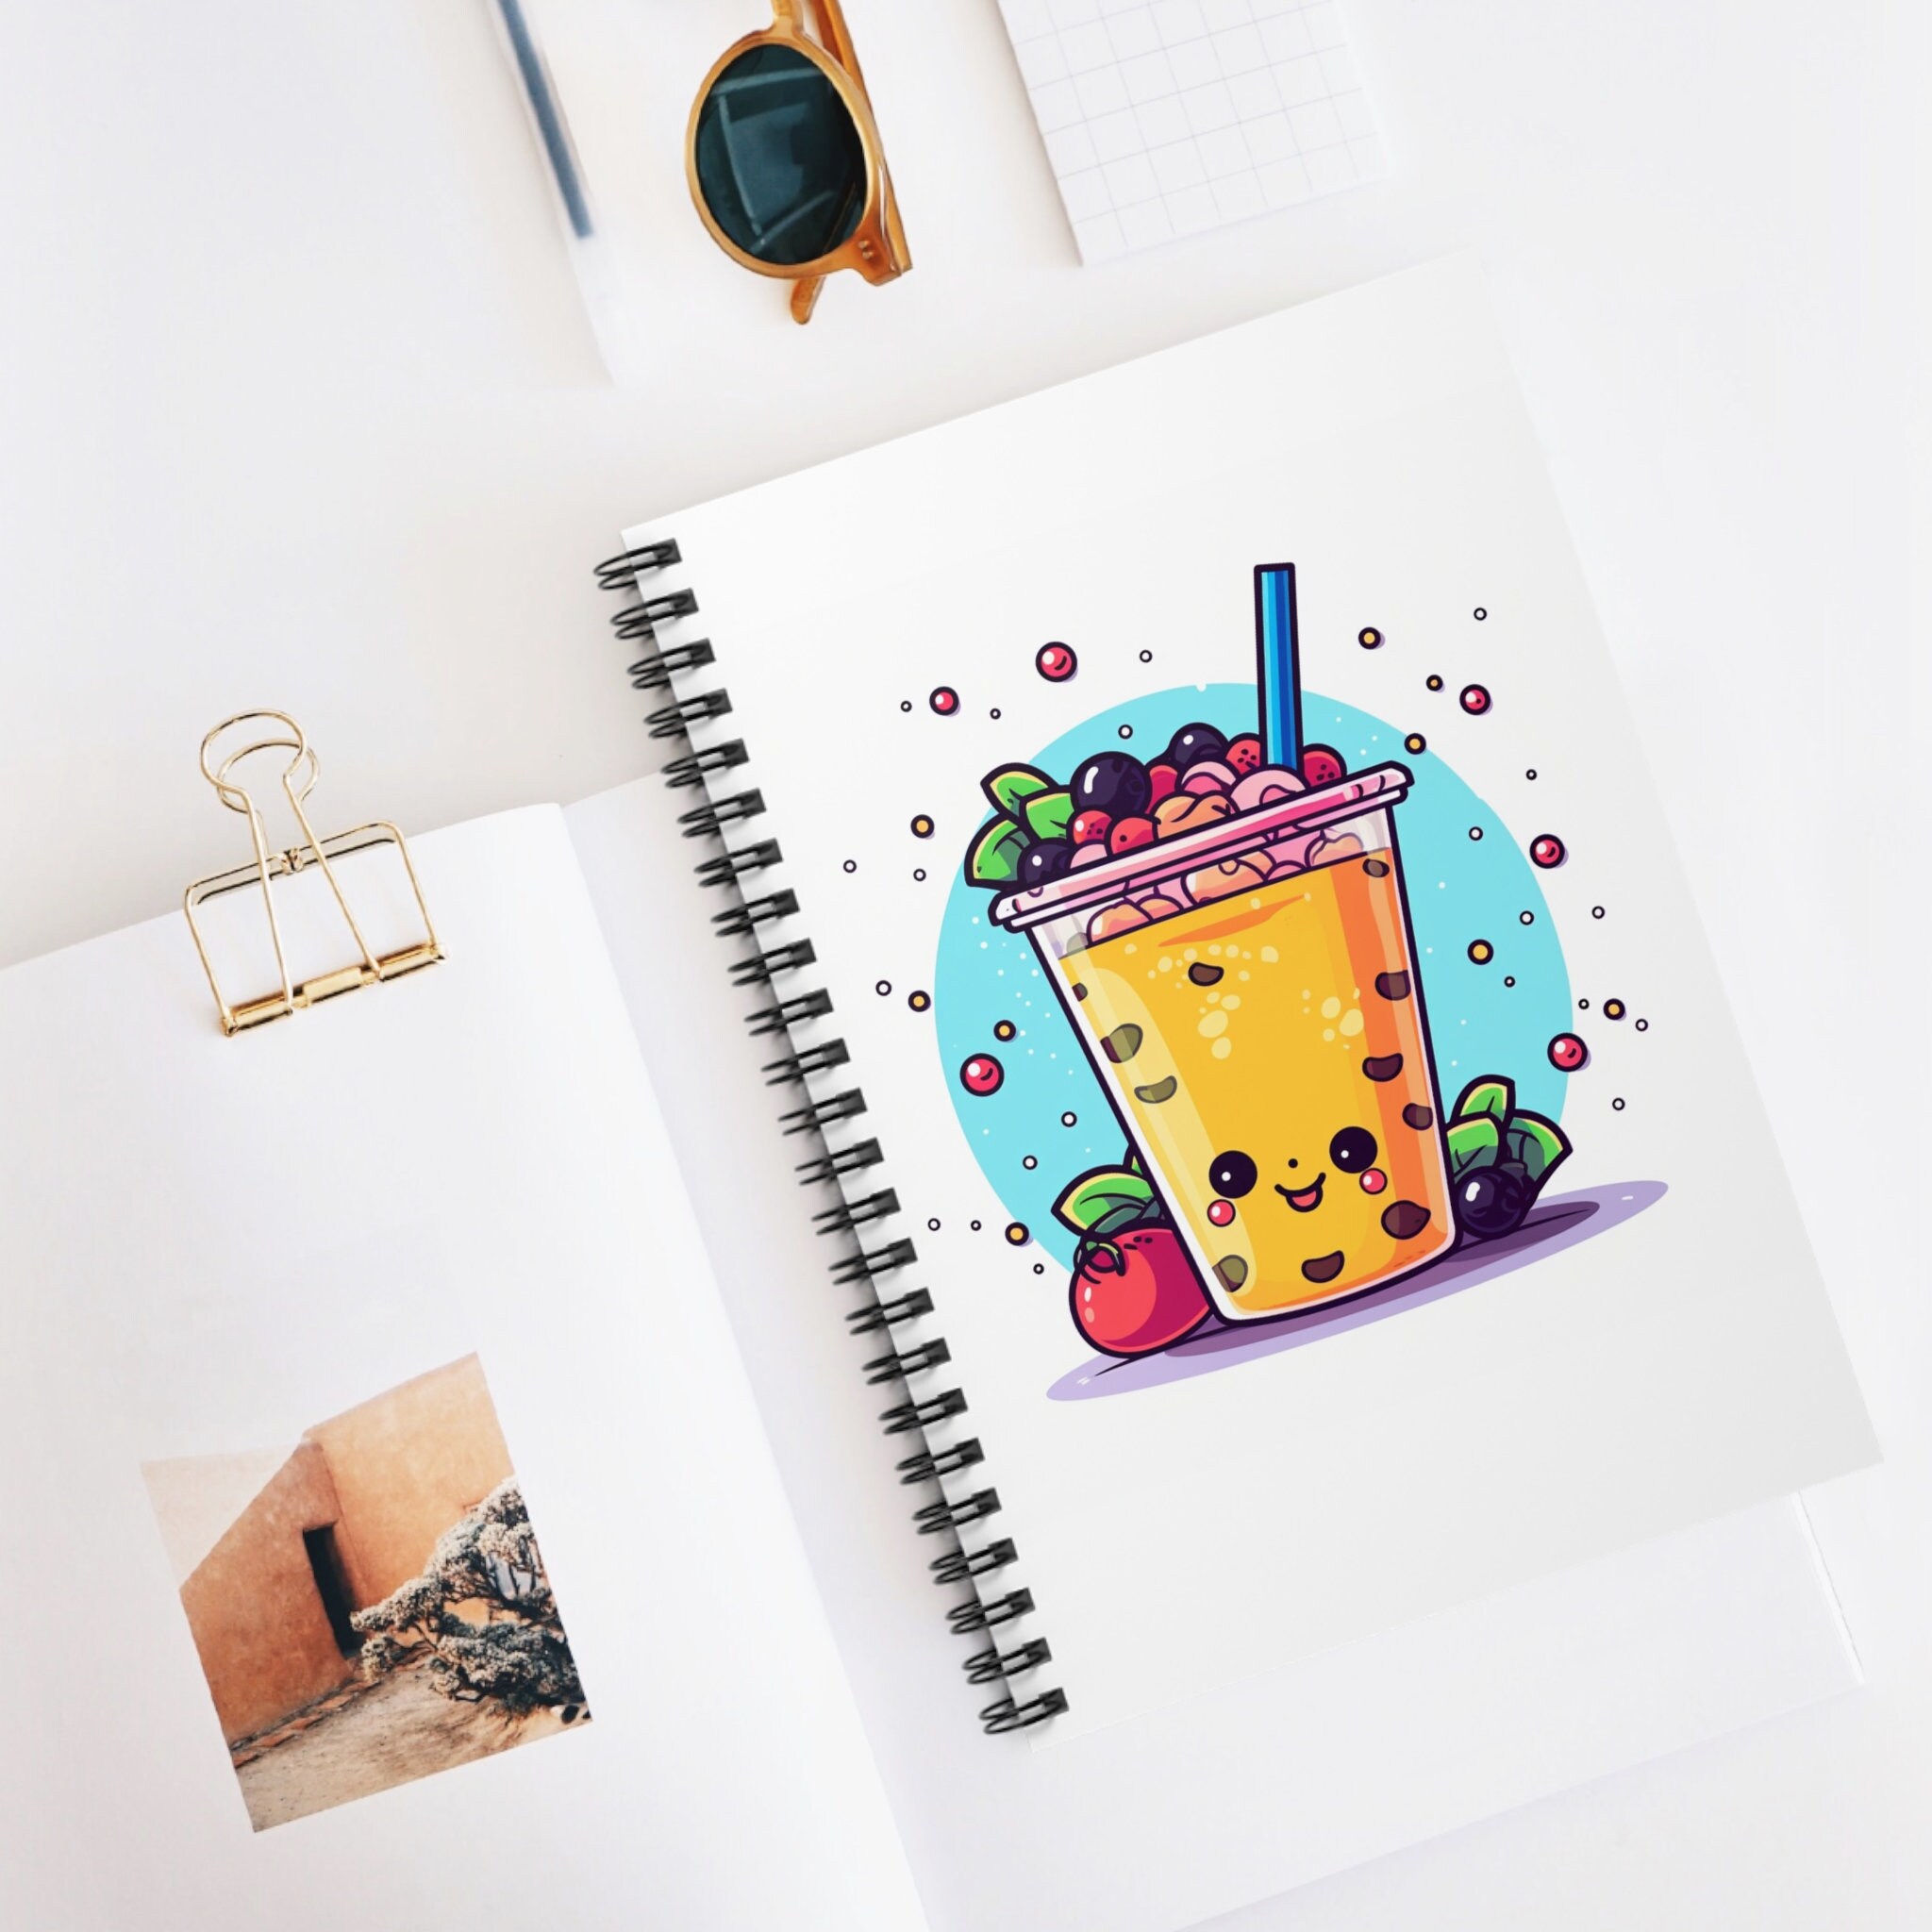 Smiley Face Straw Cup Soda Drink Spiral Notebook for Sale by eBeth-Art